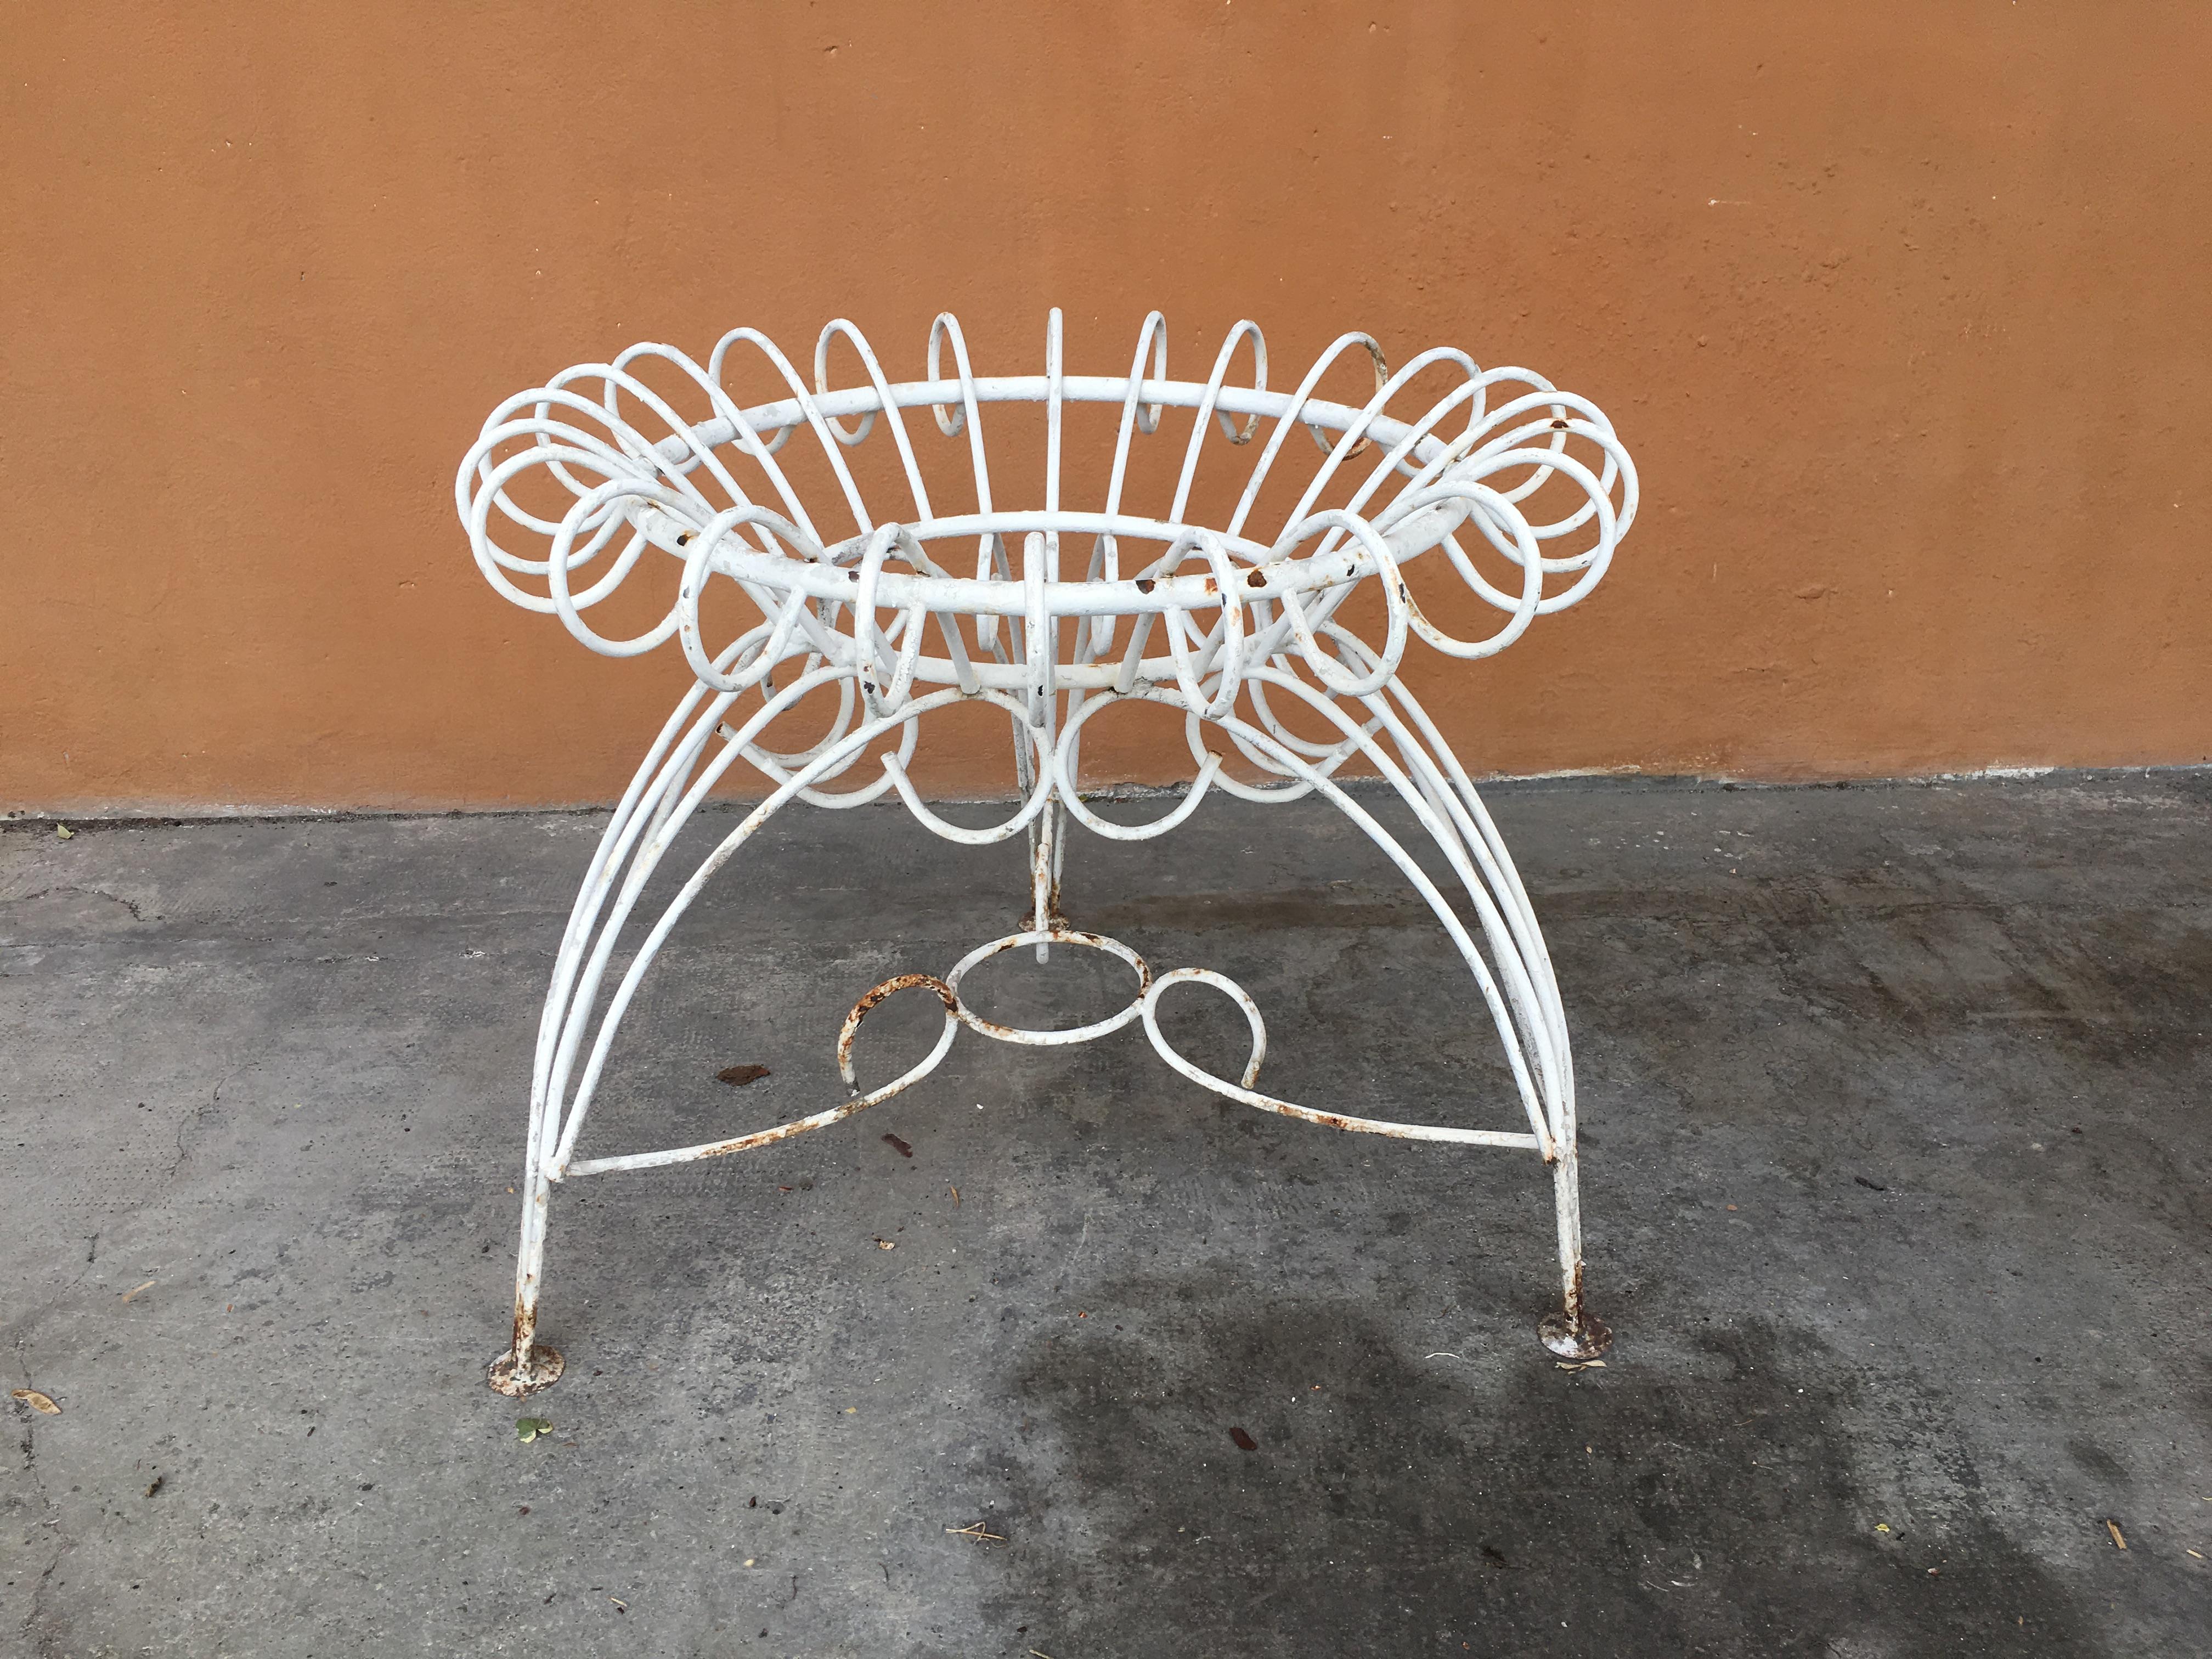 Mid-Century Modern French painted iron garden table base, 1960s
This table needs a glass top. Quotation on demand.
If needed the table can come with its garden chairs as shown in the picture.